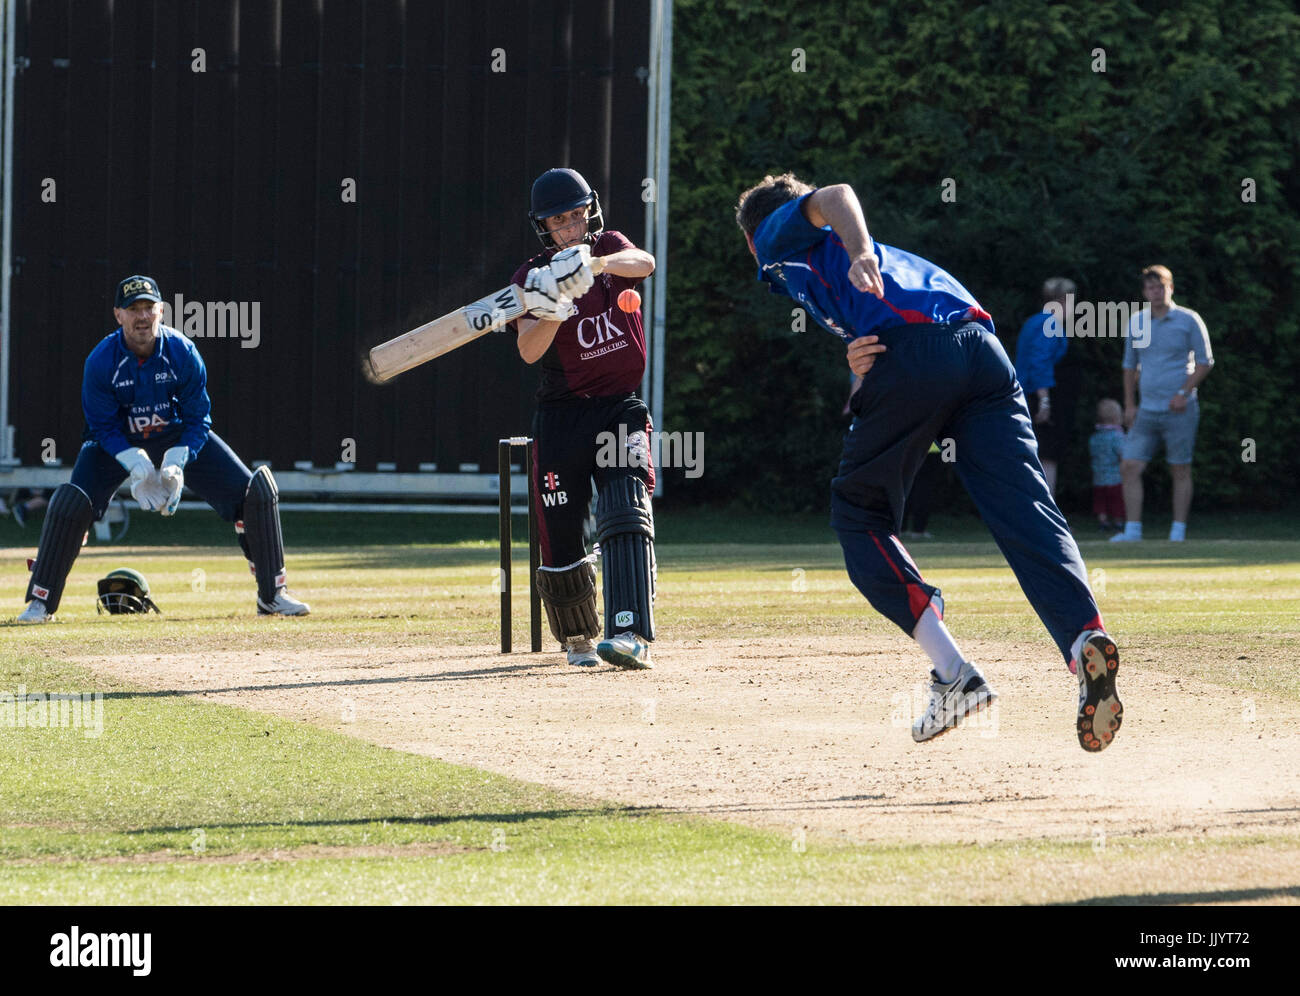 Brentwood, Essex 21st July 2017, Graham Onions bowls for the PCA English Masters against Brentwood Cricket Club. Credit: Ian Davidson/Alamy Live News Stock Photo